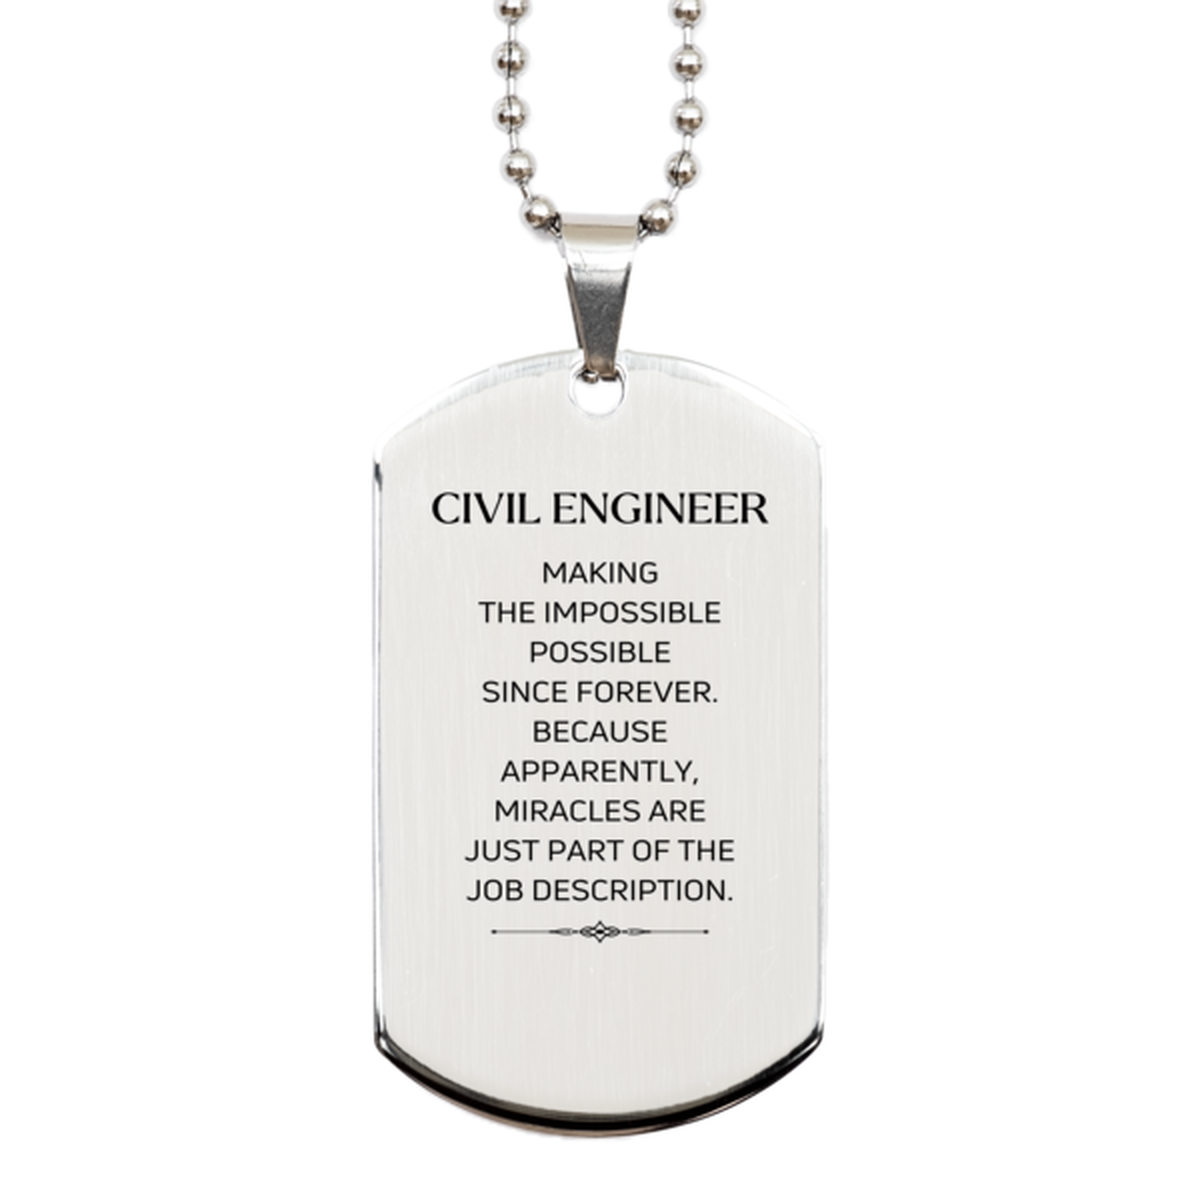 Funny Civil Engineer Gifts, Miracles are just part of the job description, Inspirational Birthday Silver Dog Tag For Civil Engineer, Men, Women, Coworkers, Friends, Boss